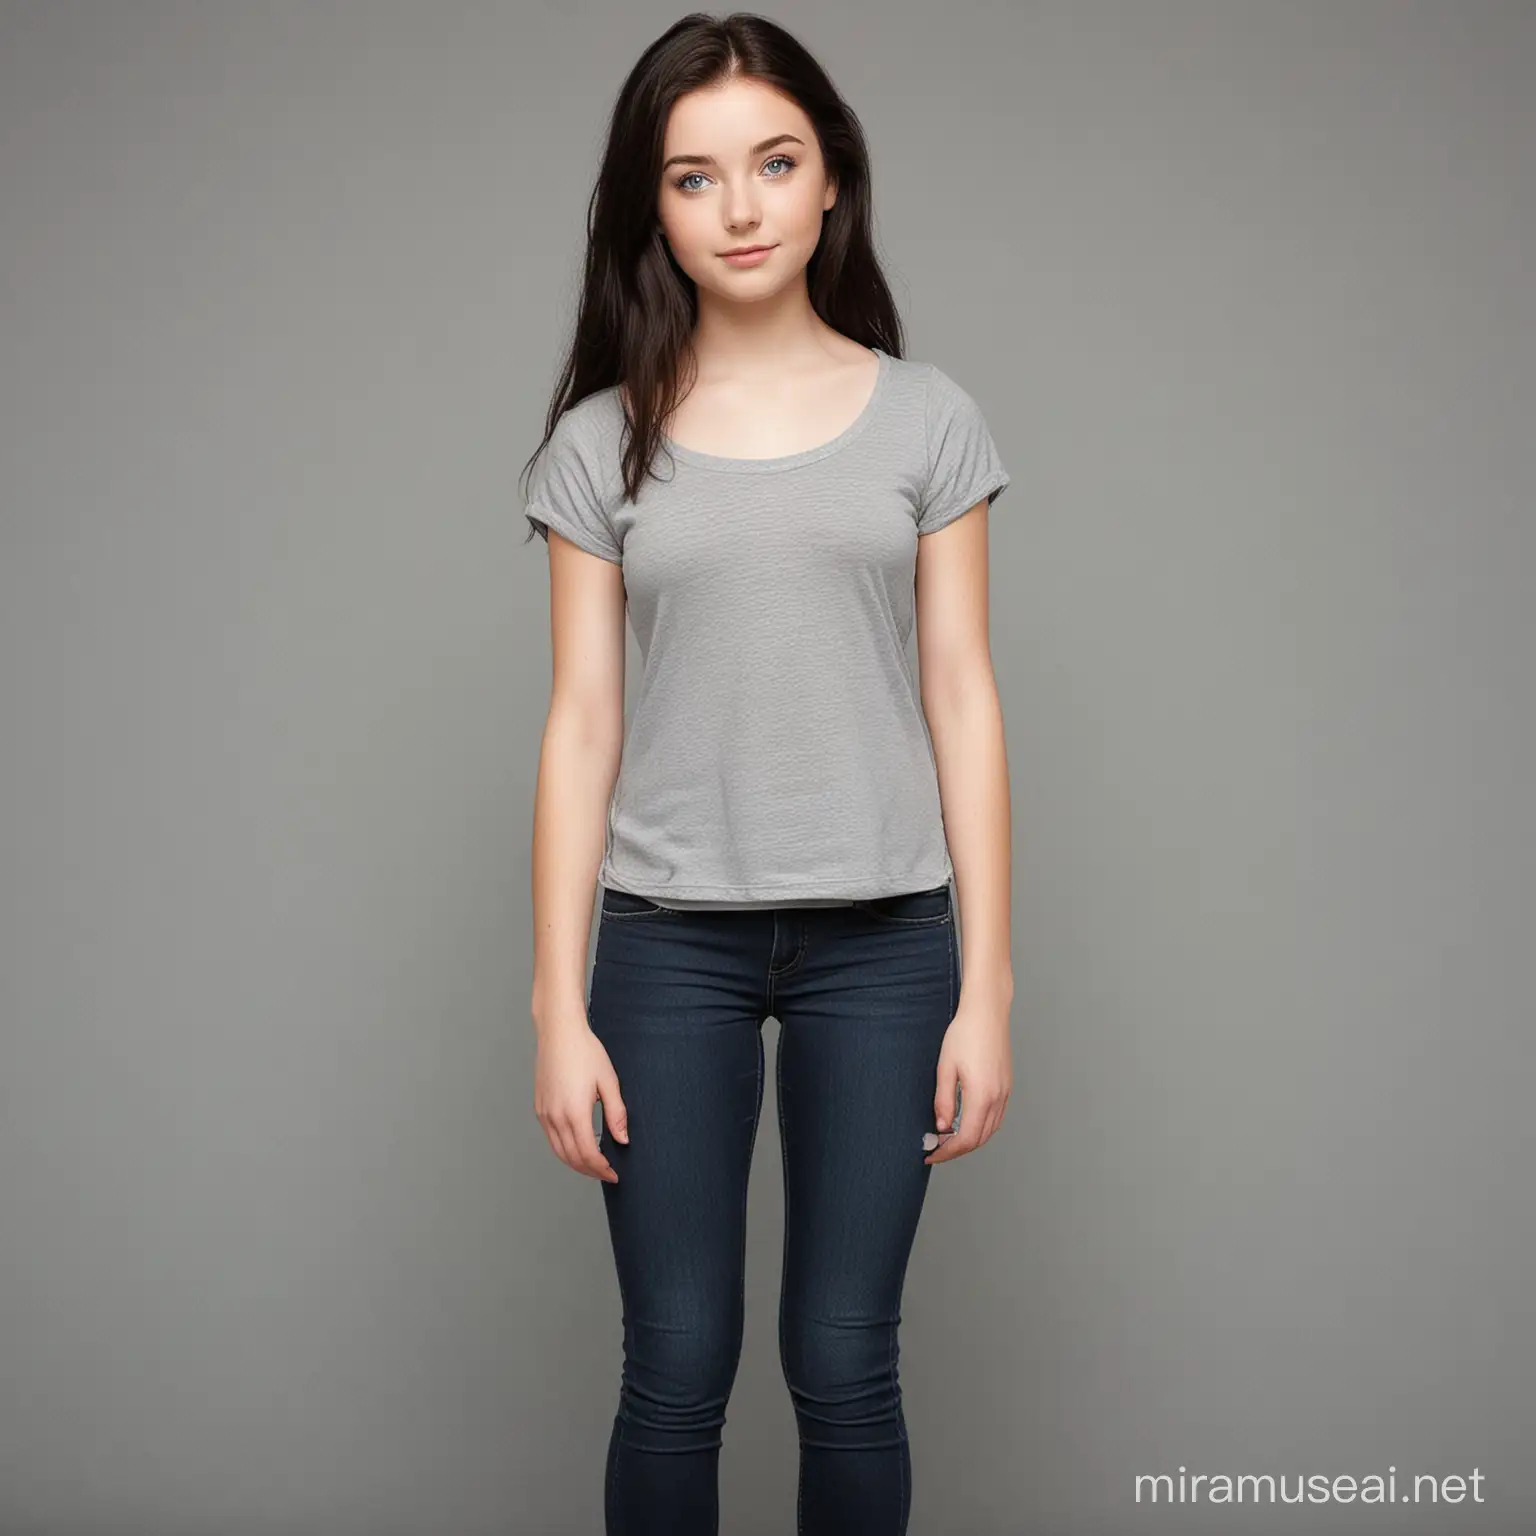 A full body picture of a girl that is the age of 16, she is white, has auburn black hair, has grey-blue eyes and is somewhat tall